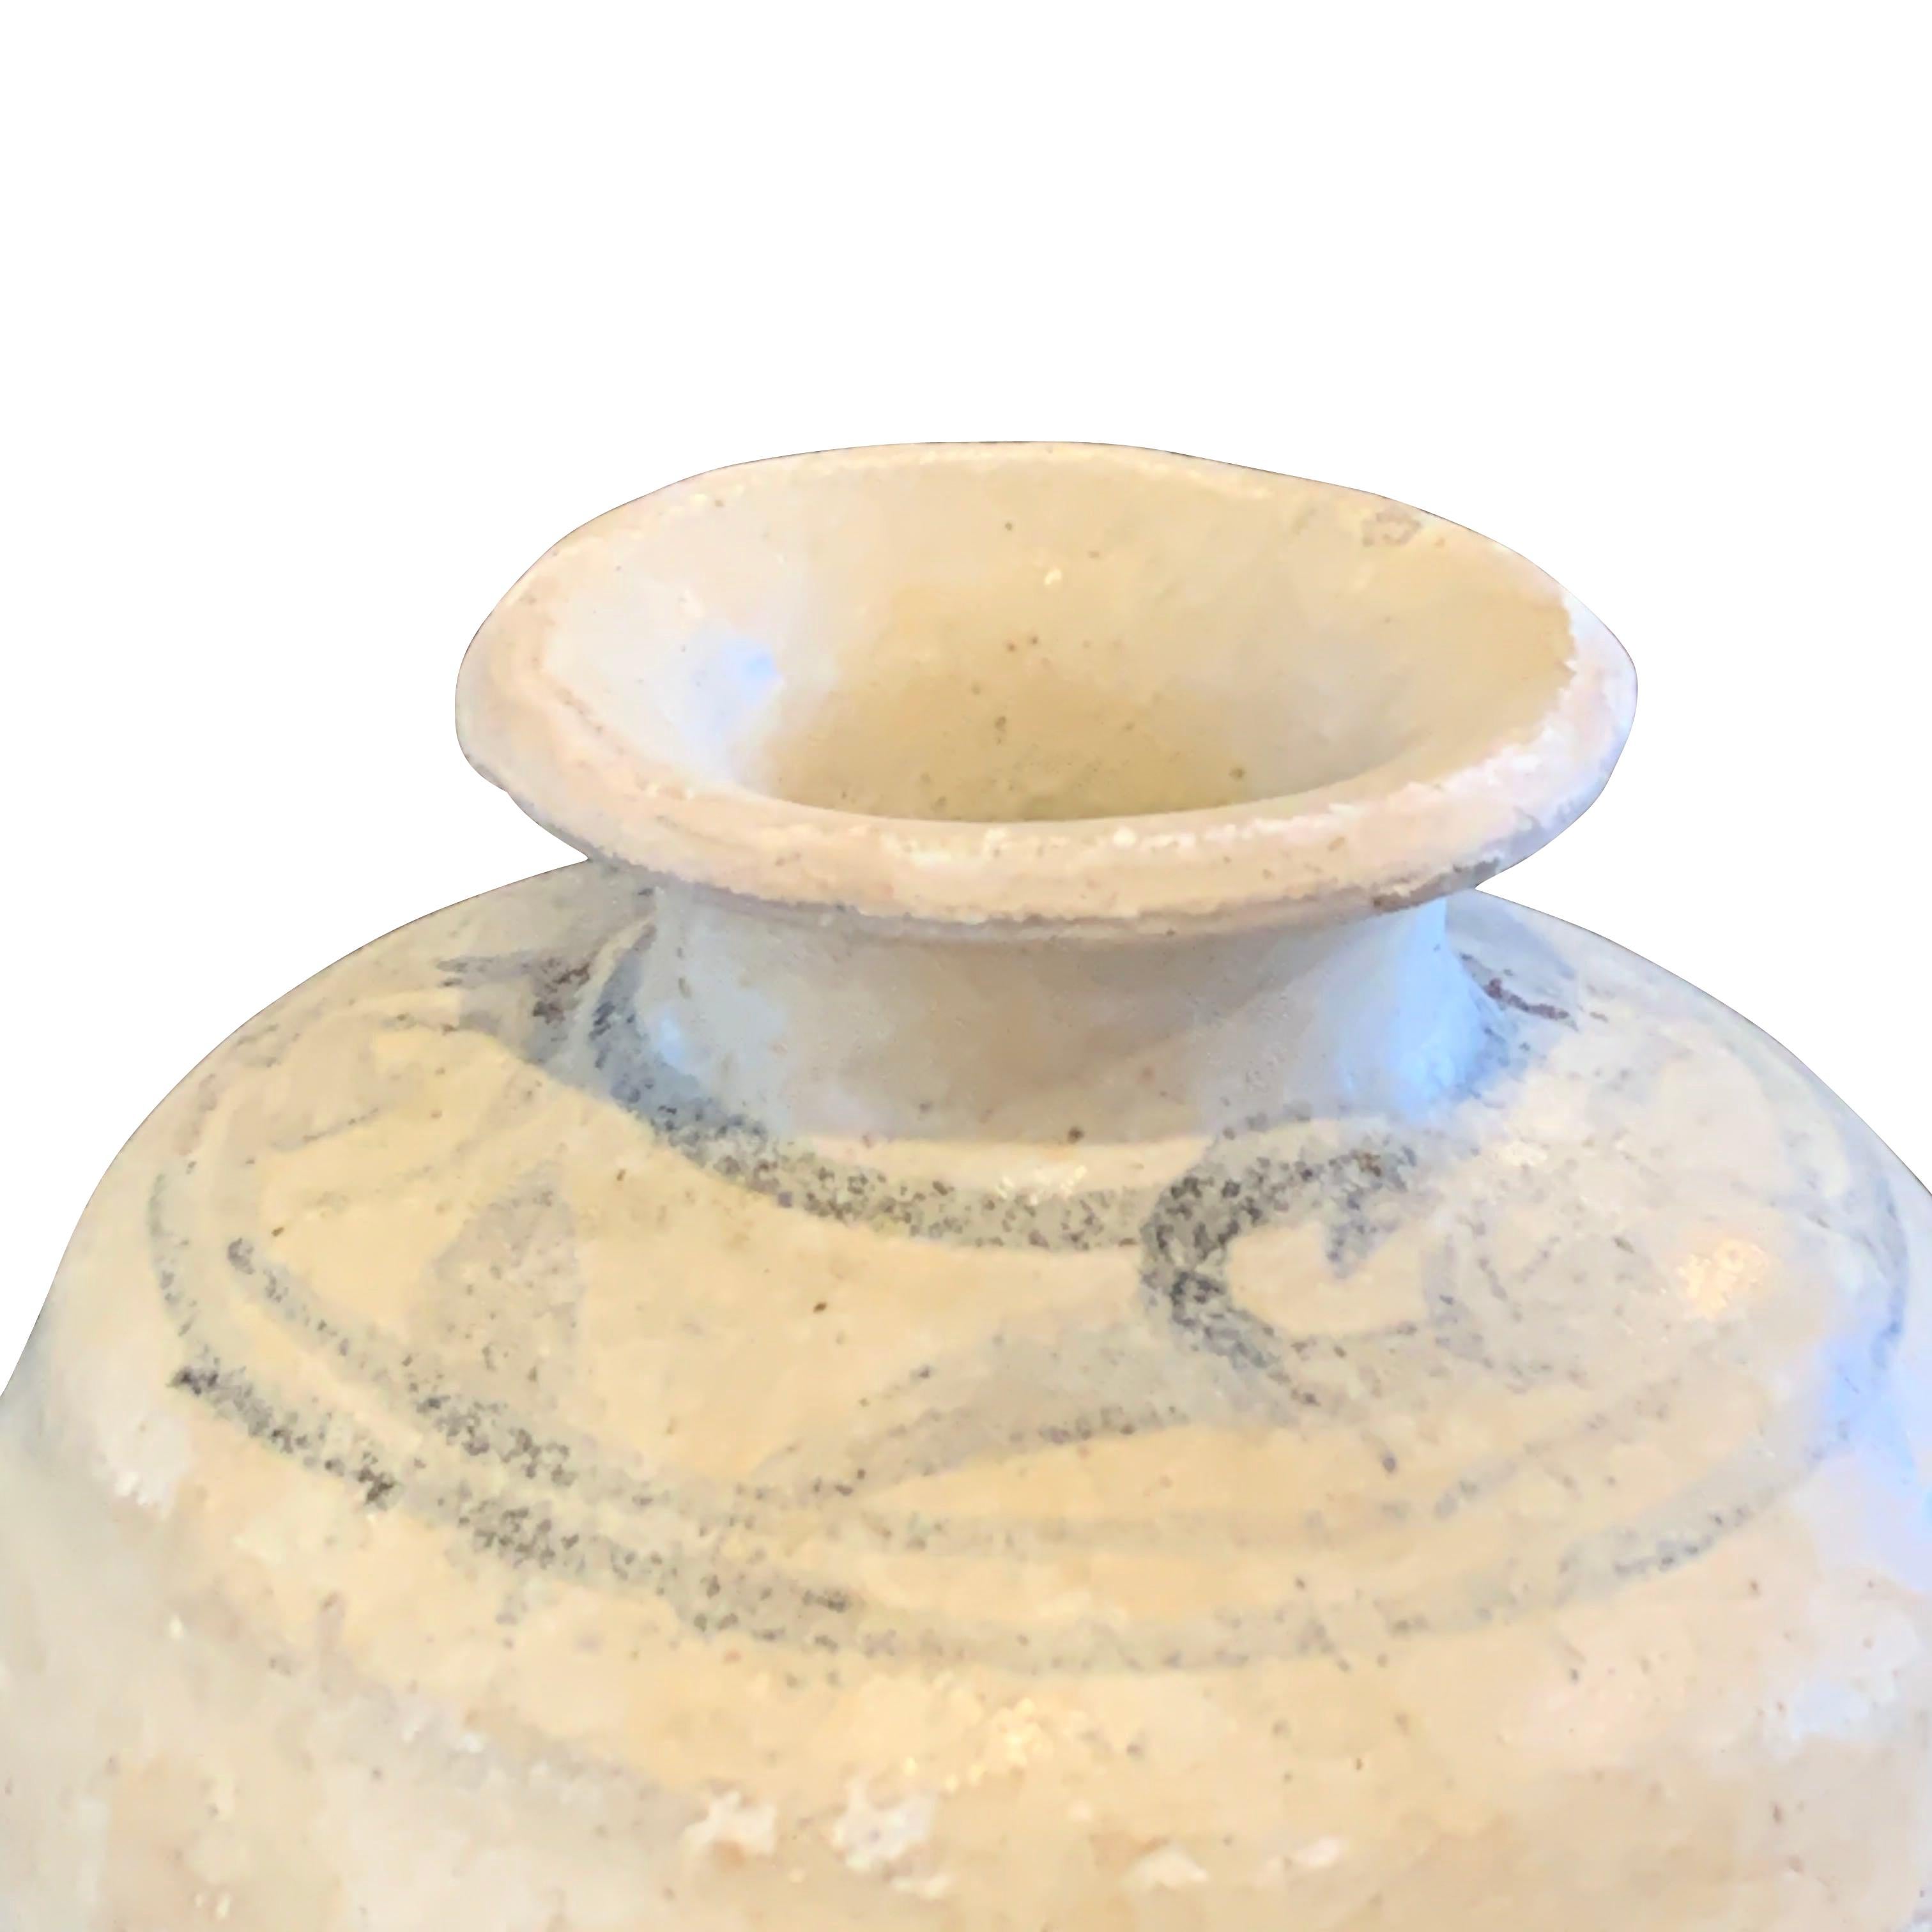 16th century pottery from the Sawankhalok district in the Sukhothai Provence of Thailand
Hand painted pale grey decoration
Natural aged patina.

